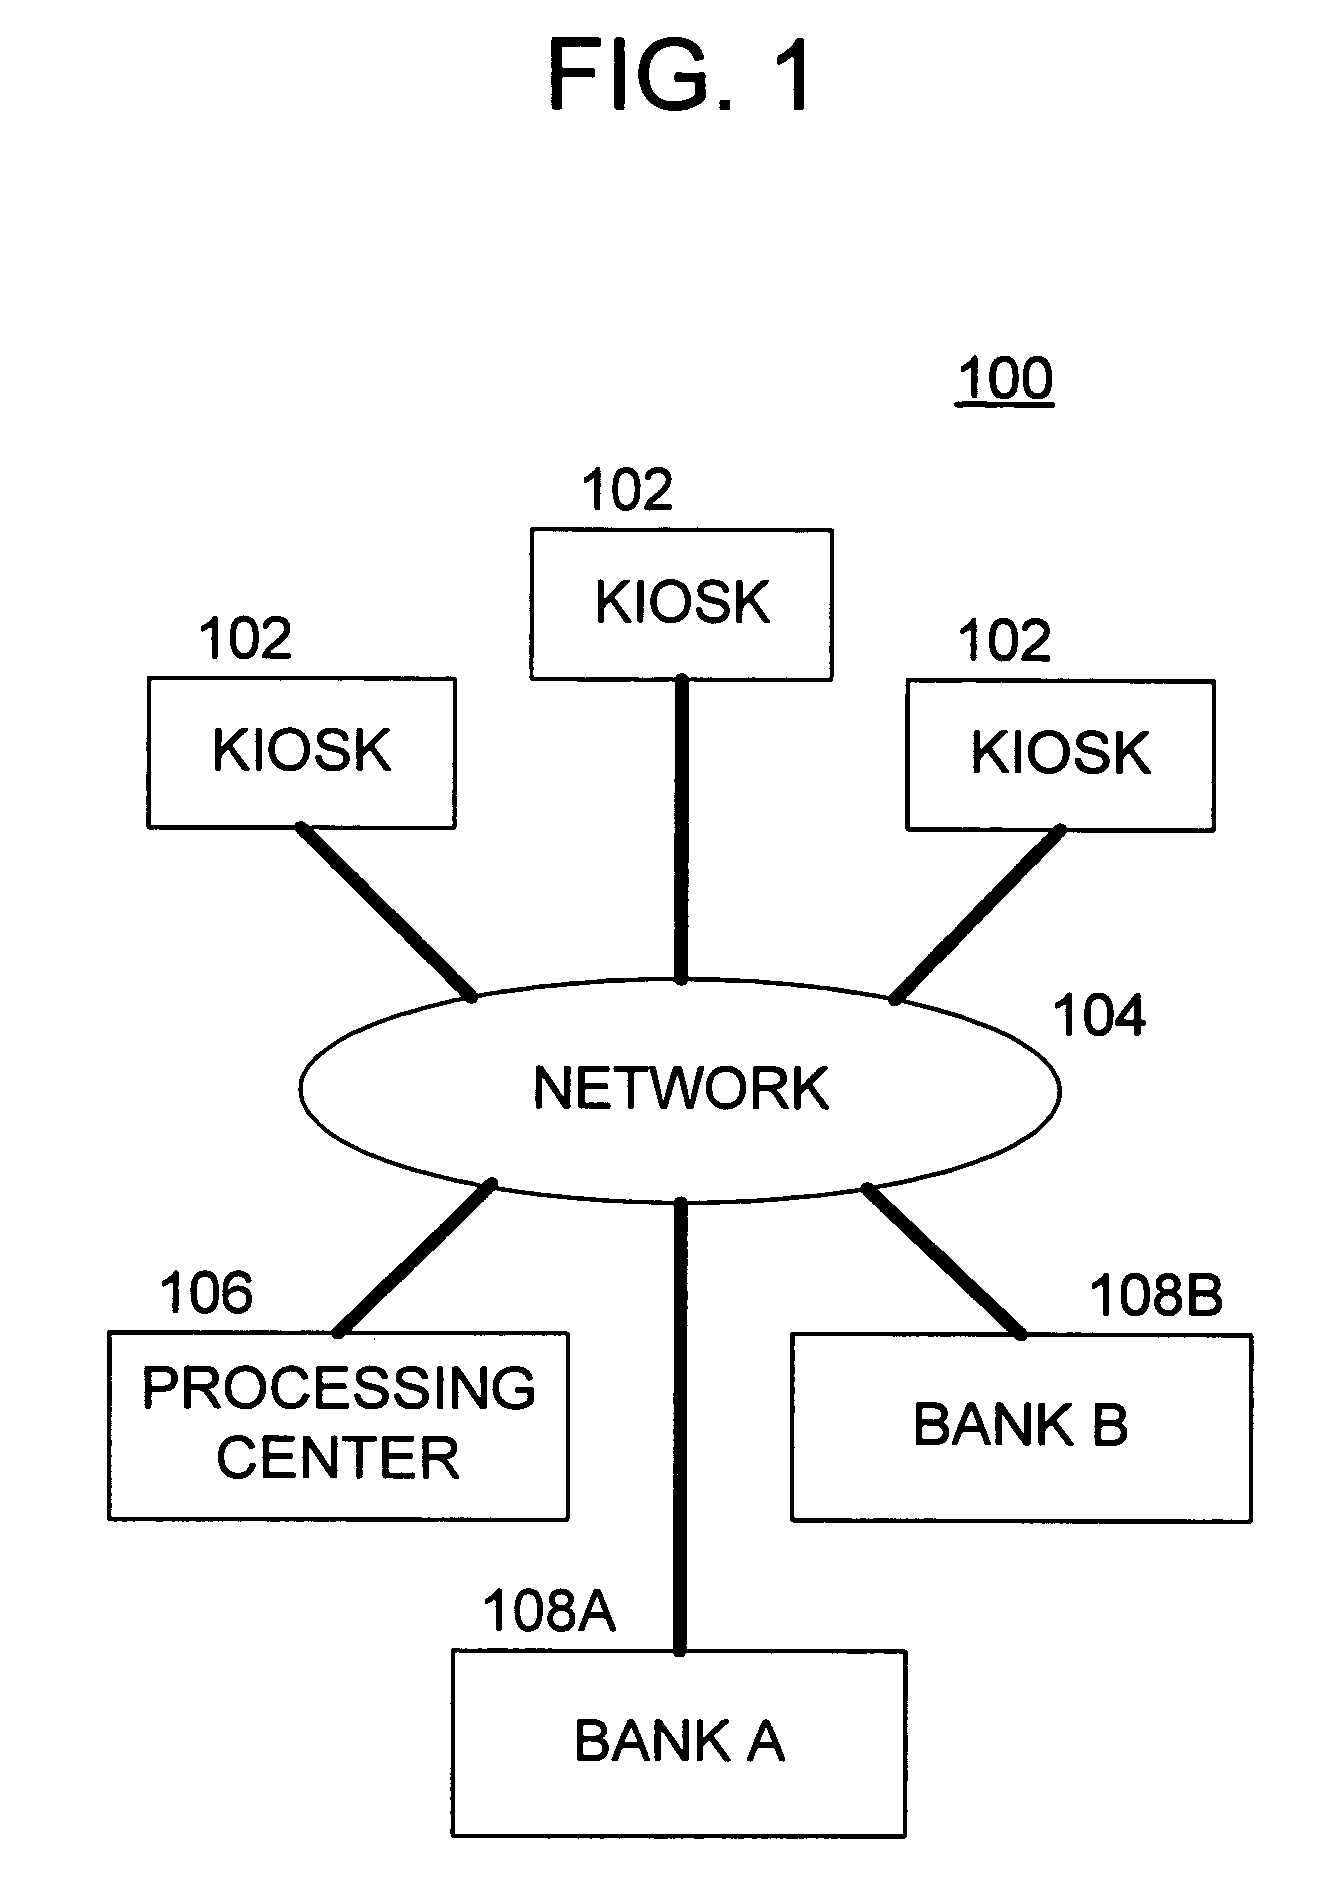 Methods and apparatus for facilitating a currency exchange transaction